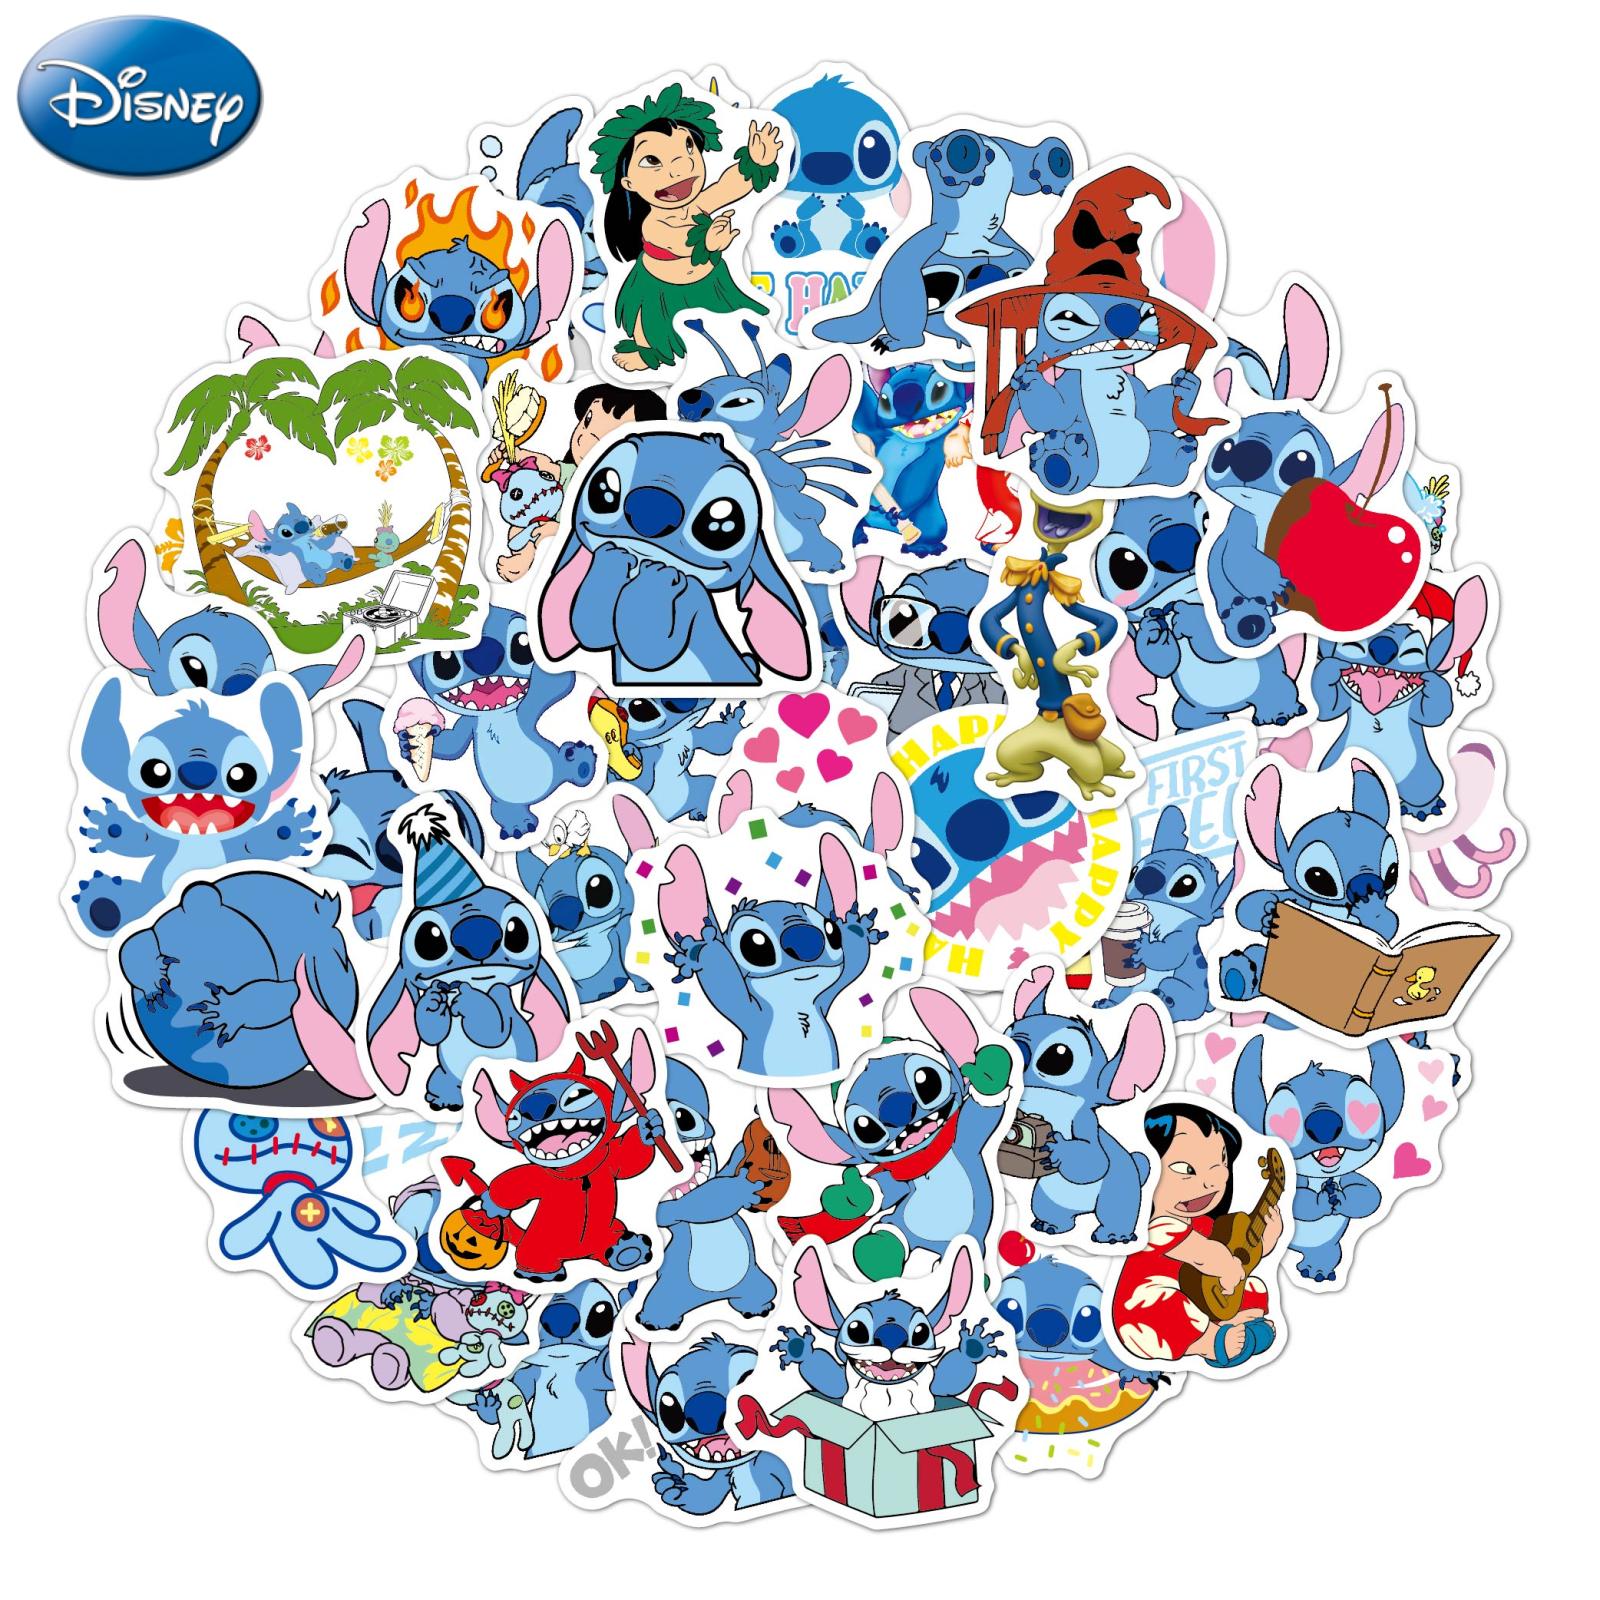 50 Pcs Alice in Wonderland Disney Movies Stickers for Kid Decal